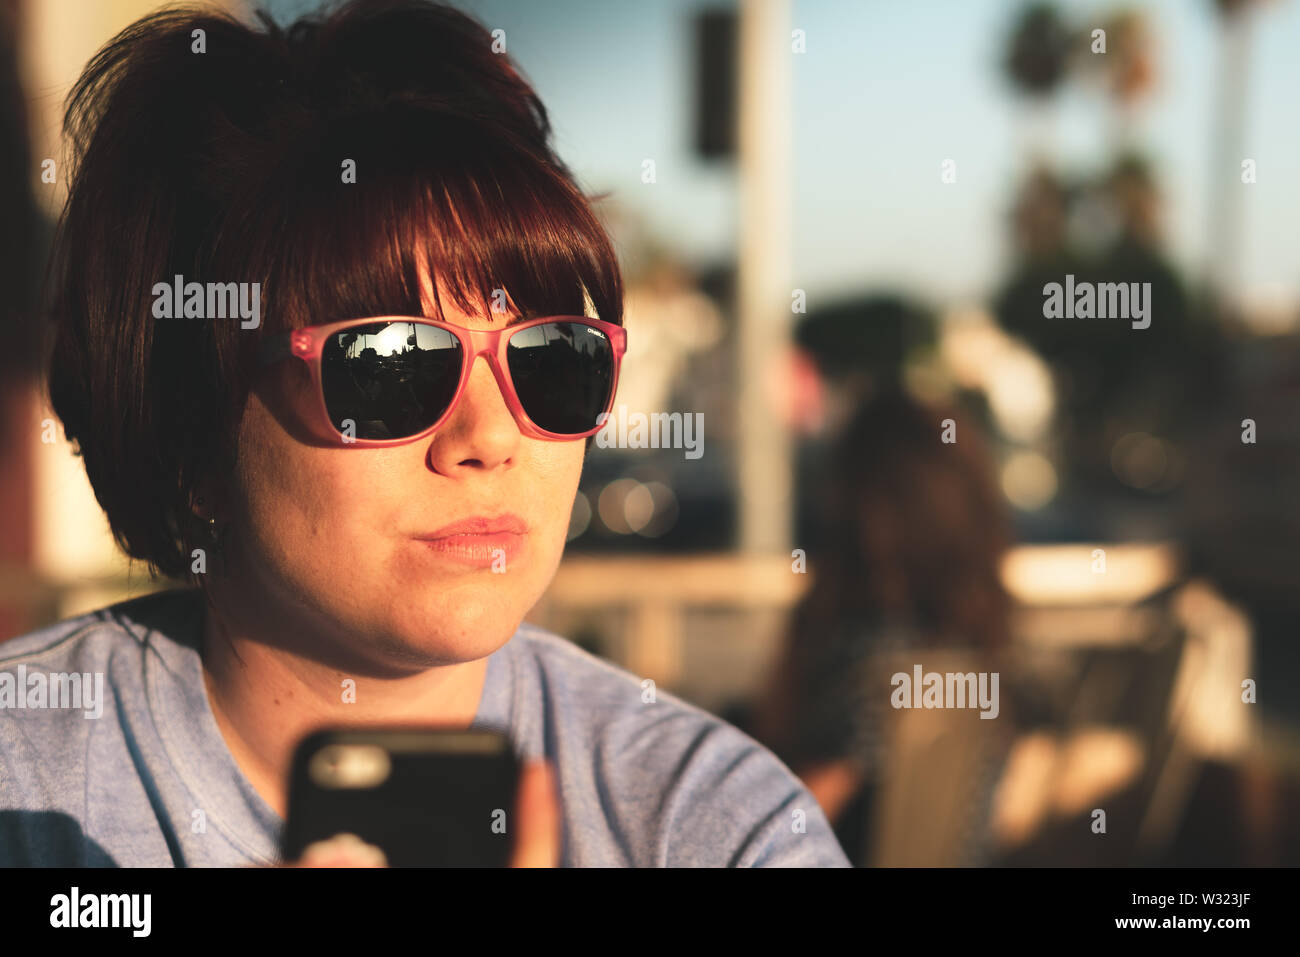 LA, USA - 31ST OCTOBER 2018: Head Portrait of Caucasian female in funky glasses looks down Hollywood Blvd, LA during a bright sunset Stock Photo